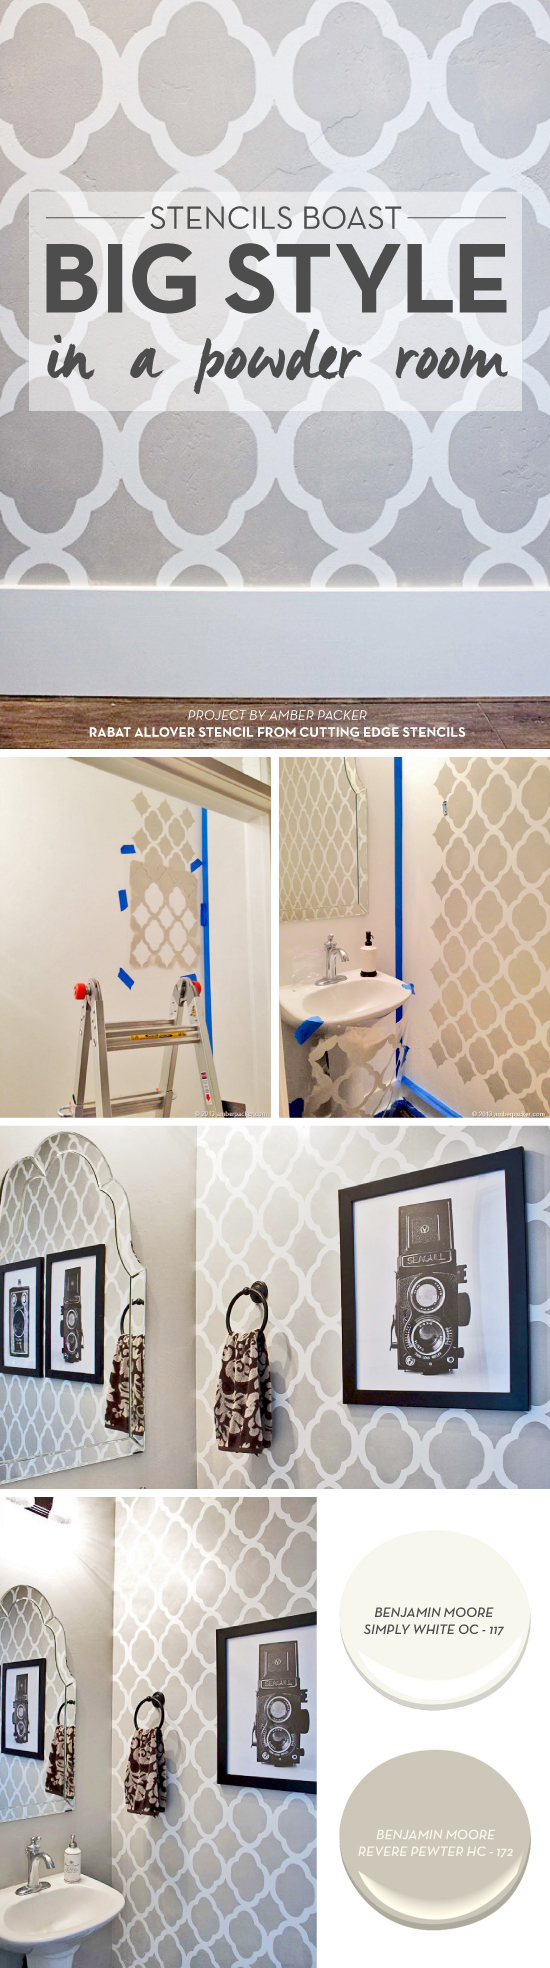 Cutting Edge Stencils shares a powder room makeover using the Rabat Allover Stencil in gray and white. http://www.cuttingedgestencils.com/moroccan-stencil-pattern-3.html